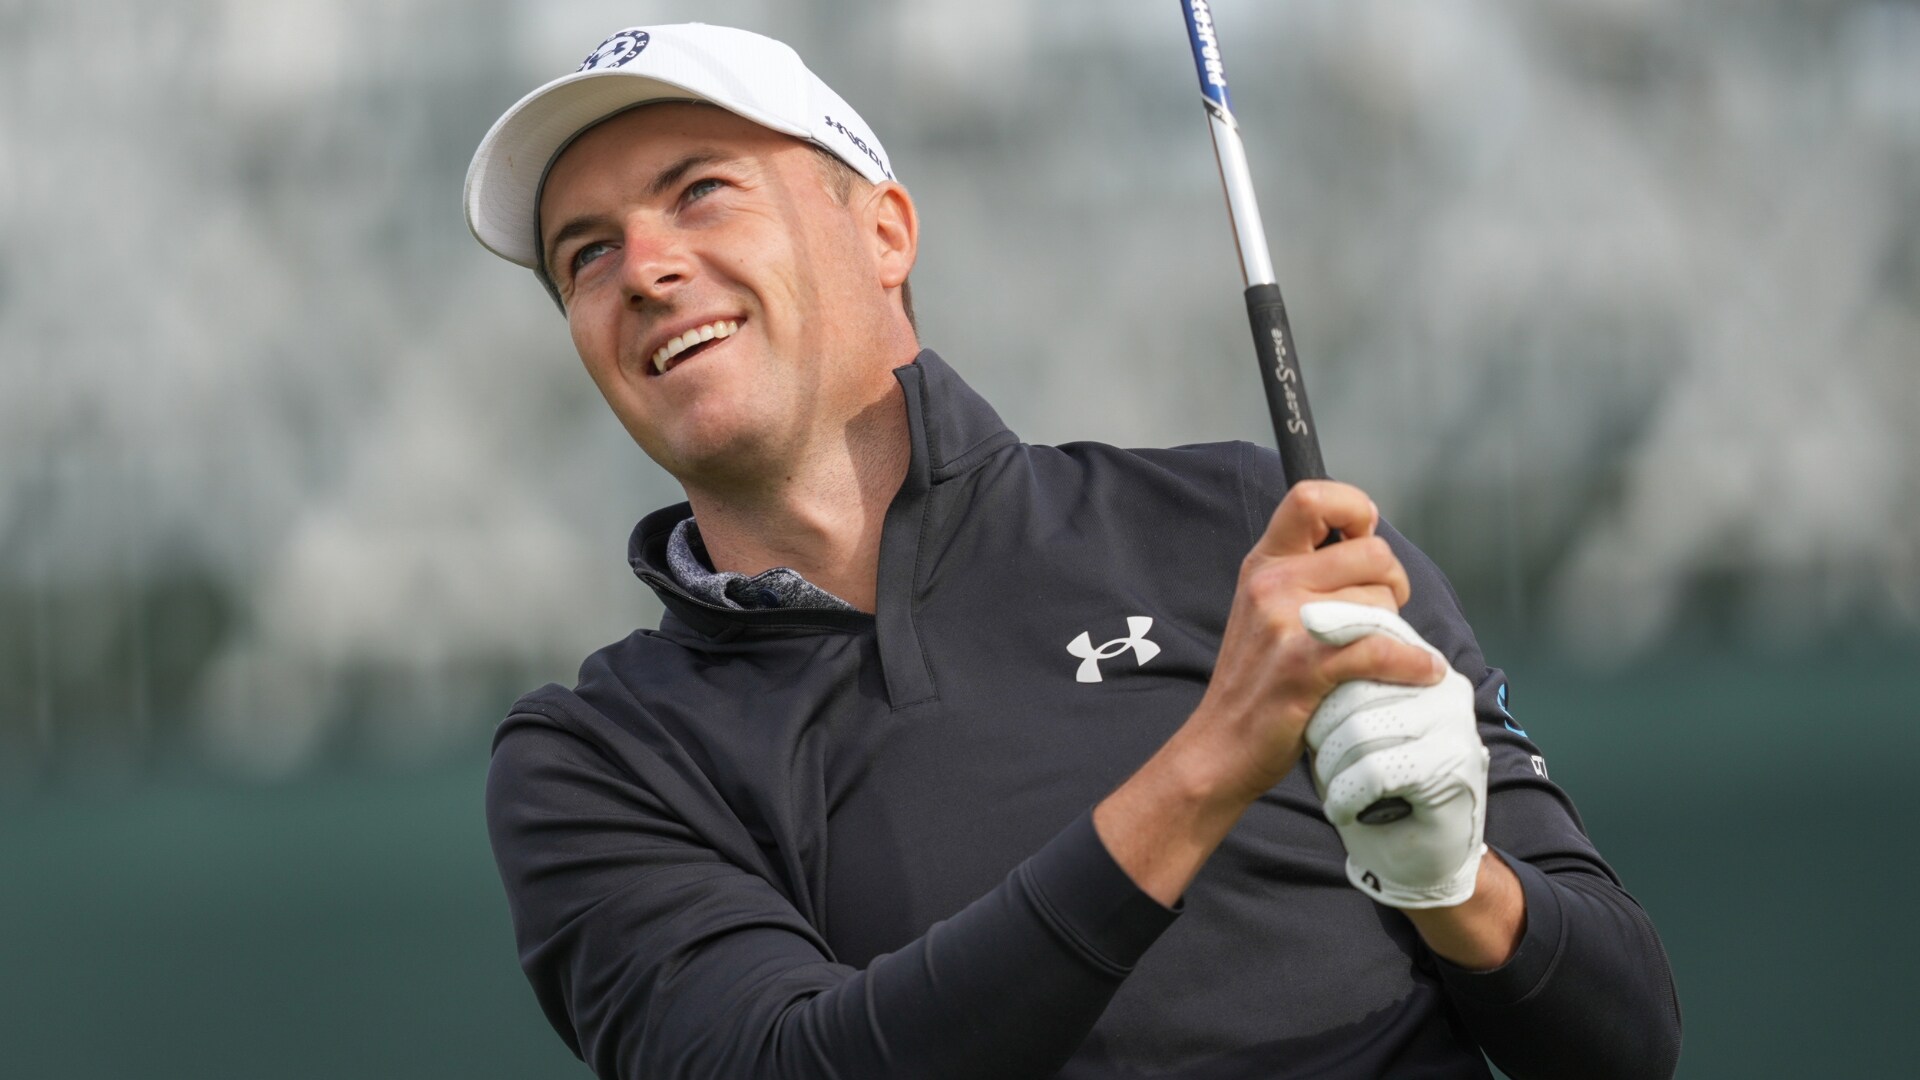 Jordan Spieth withdraws from AT&T Byron Nelson due to left wrist injury